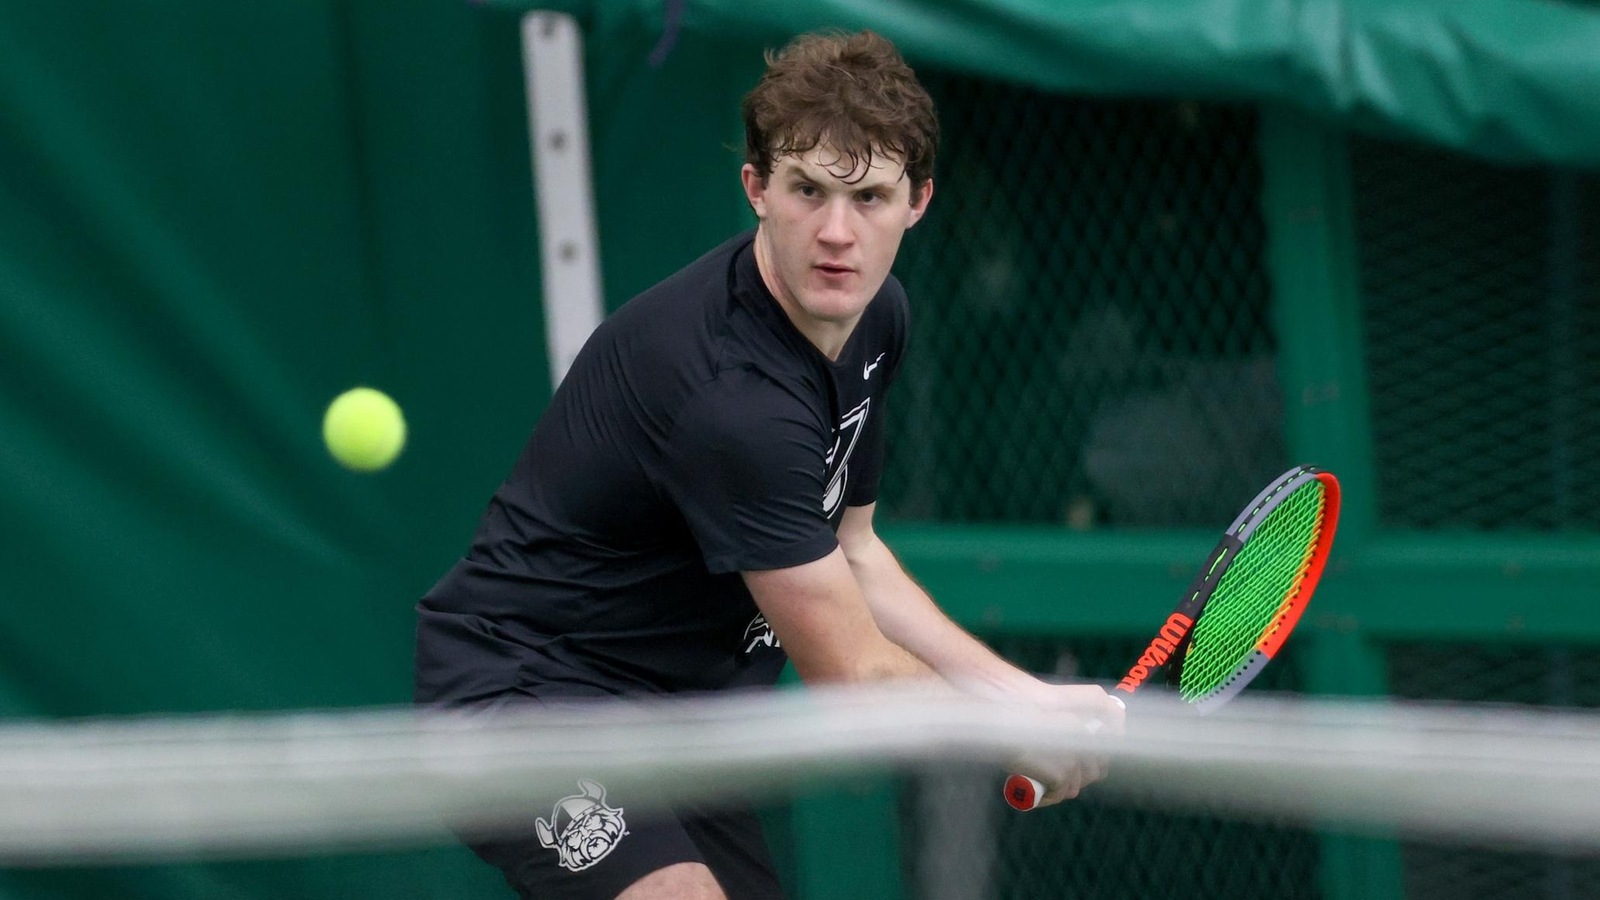 Cleveland State Men’s Tennis Earns 6-1 Victory Over Northern Kentucky